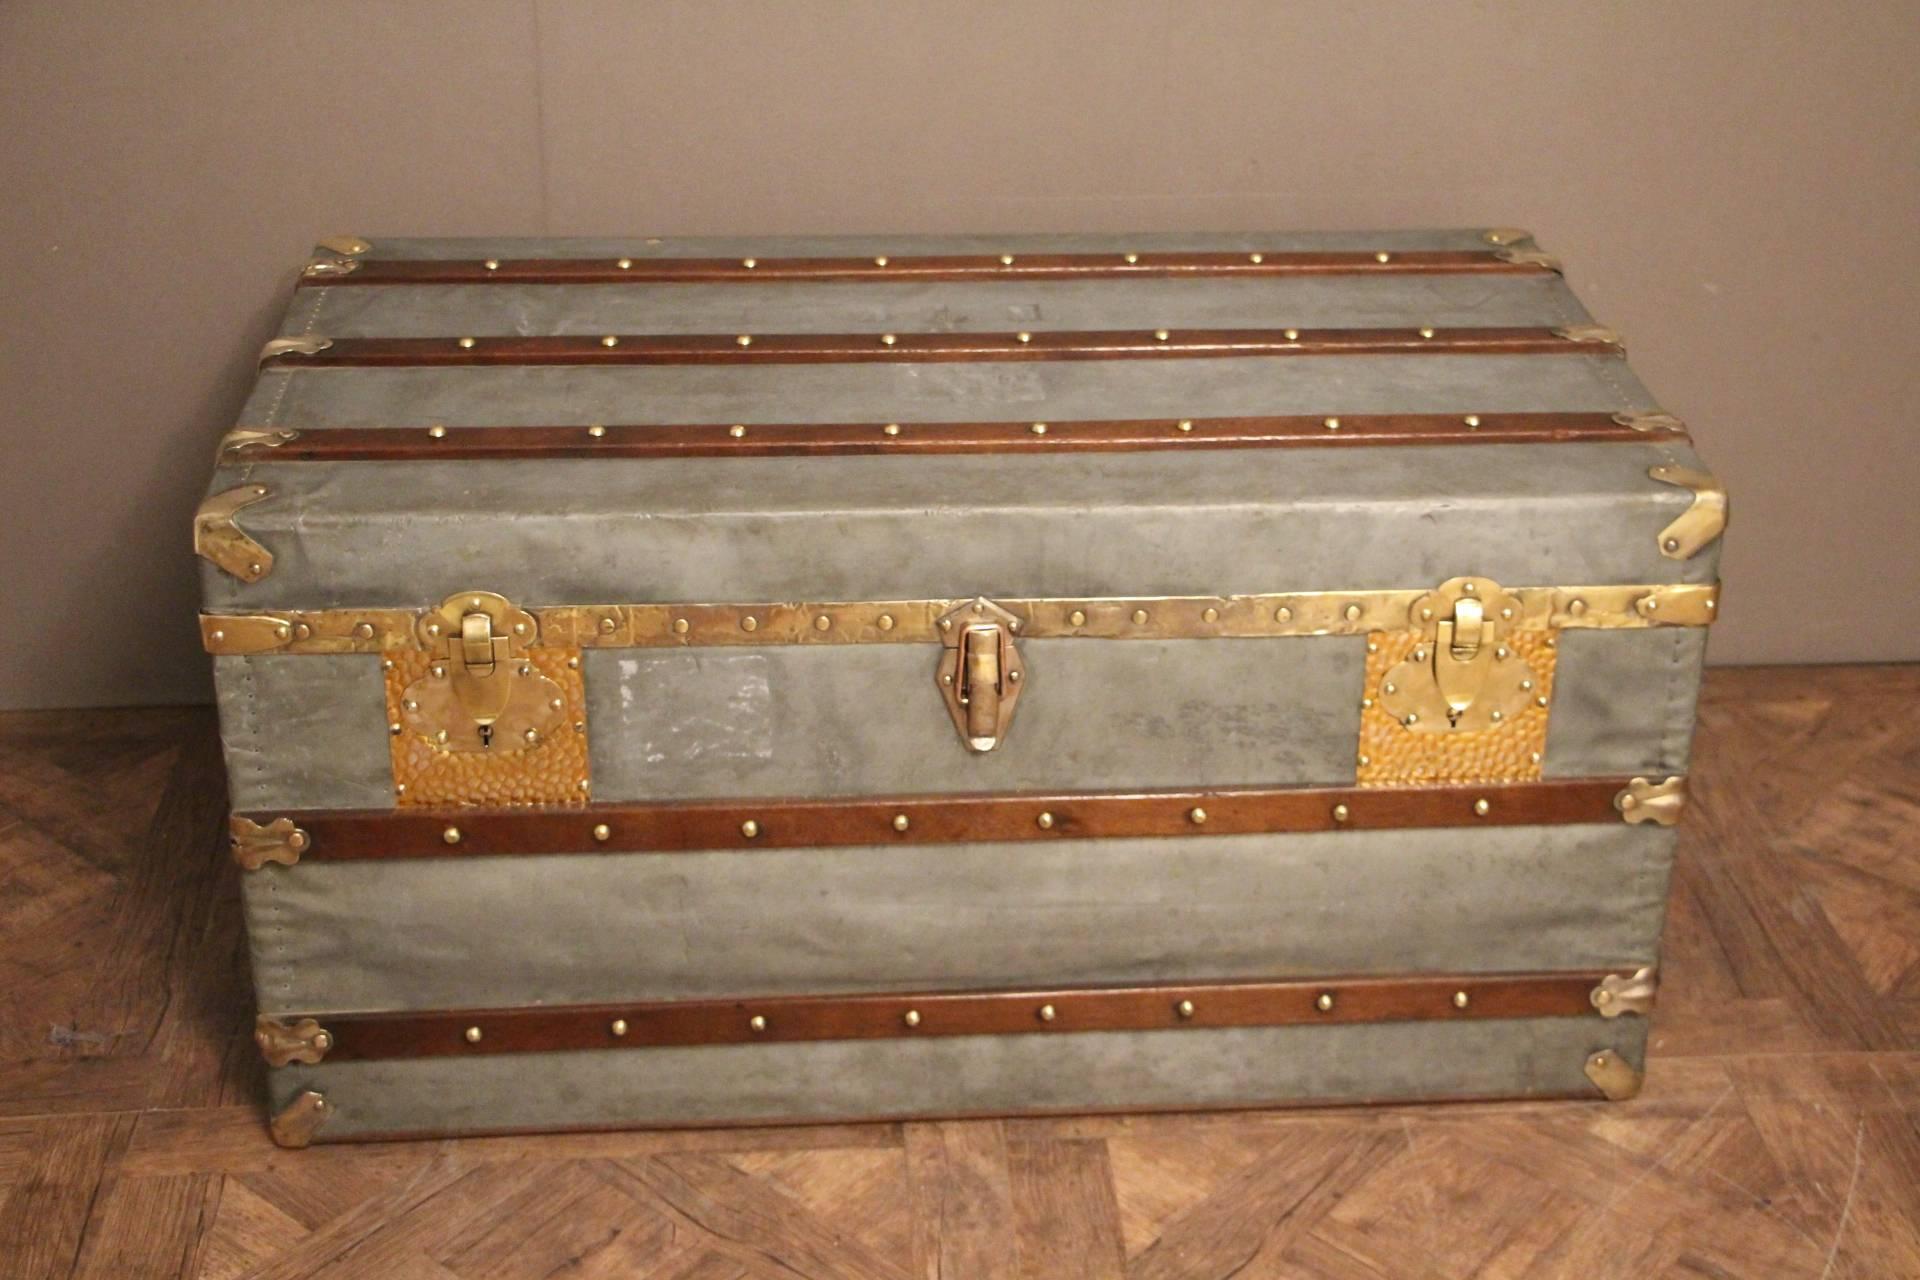 It is absolutely unusual. Its frame is wood, covered with zinc. It has got wood slats, brass and copper fittings and leather side handles.
Zinc used to be put on high end pieces of luggage that used to travel to tropical and very humid